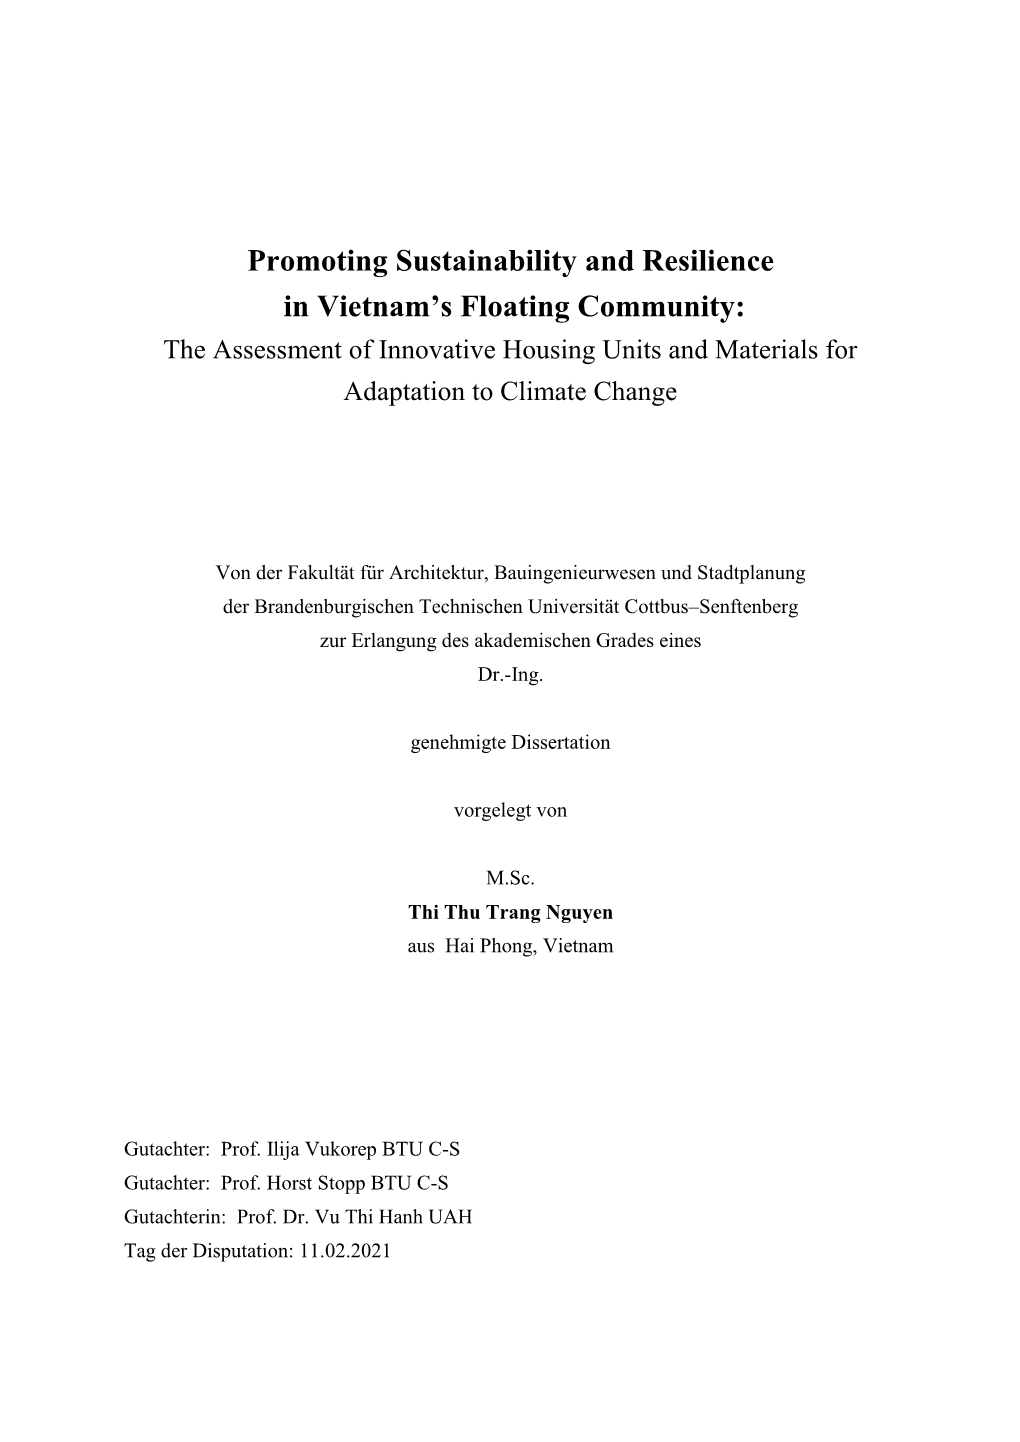 Promoting Sustainability and Resilience in Vietnam’S Floating Community: the Assessment of Innovative Housing Units and Materials for Adaptation to Climate Change